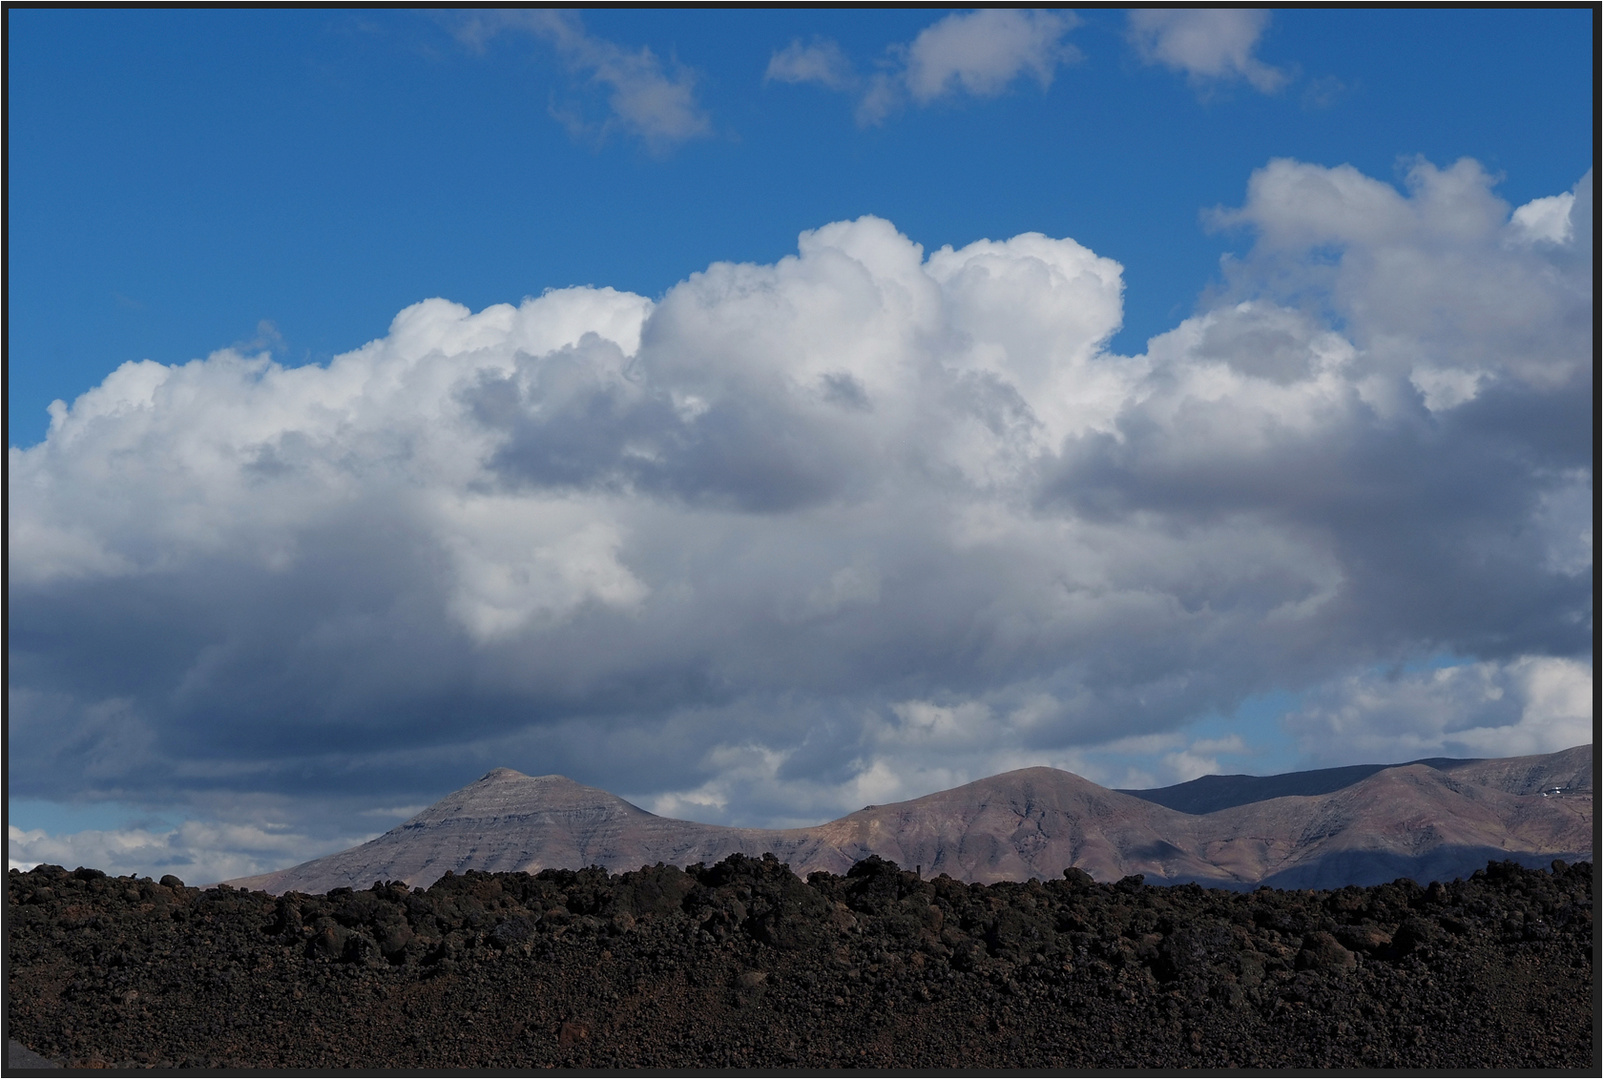 Clouds over the Volcano